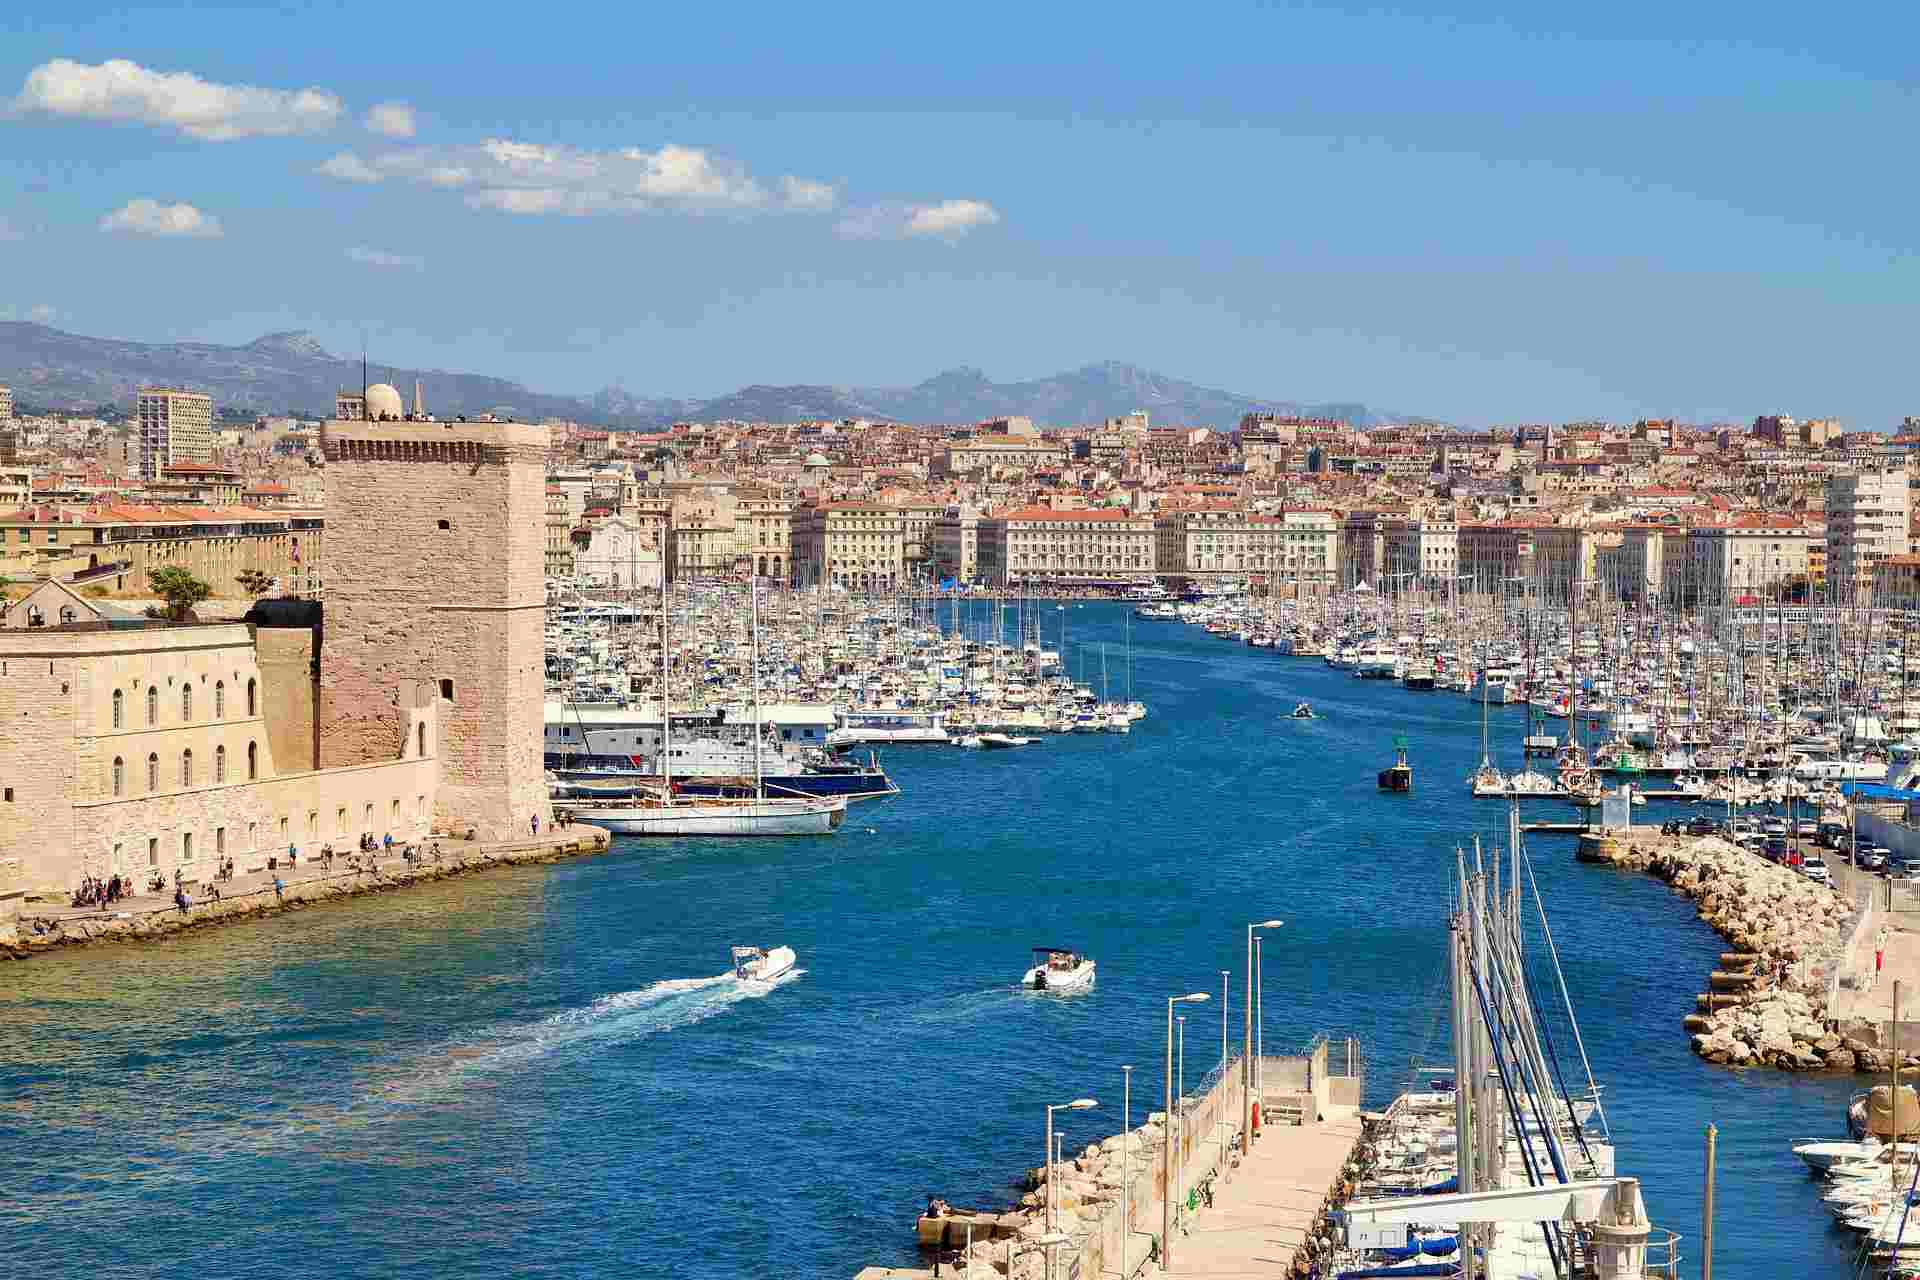 View of the Marina in Marseille